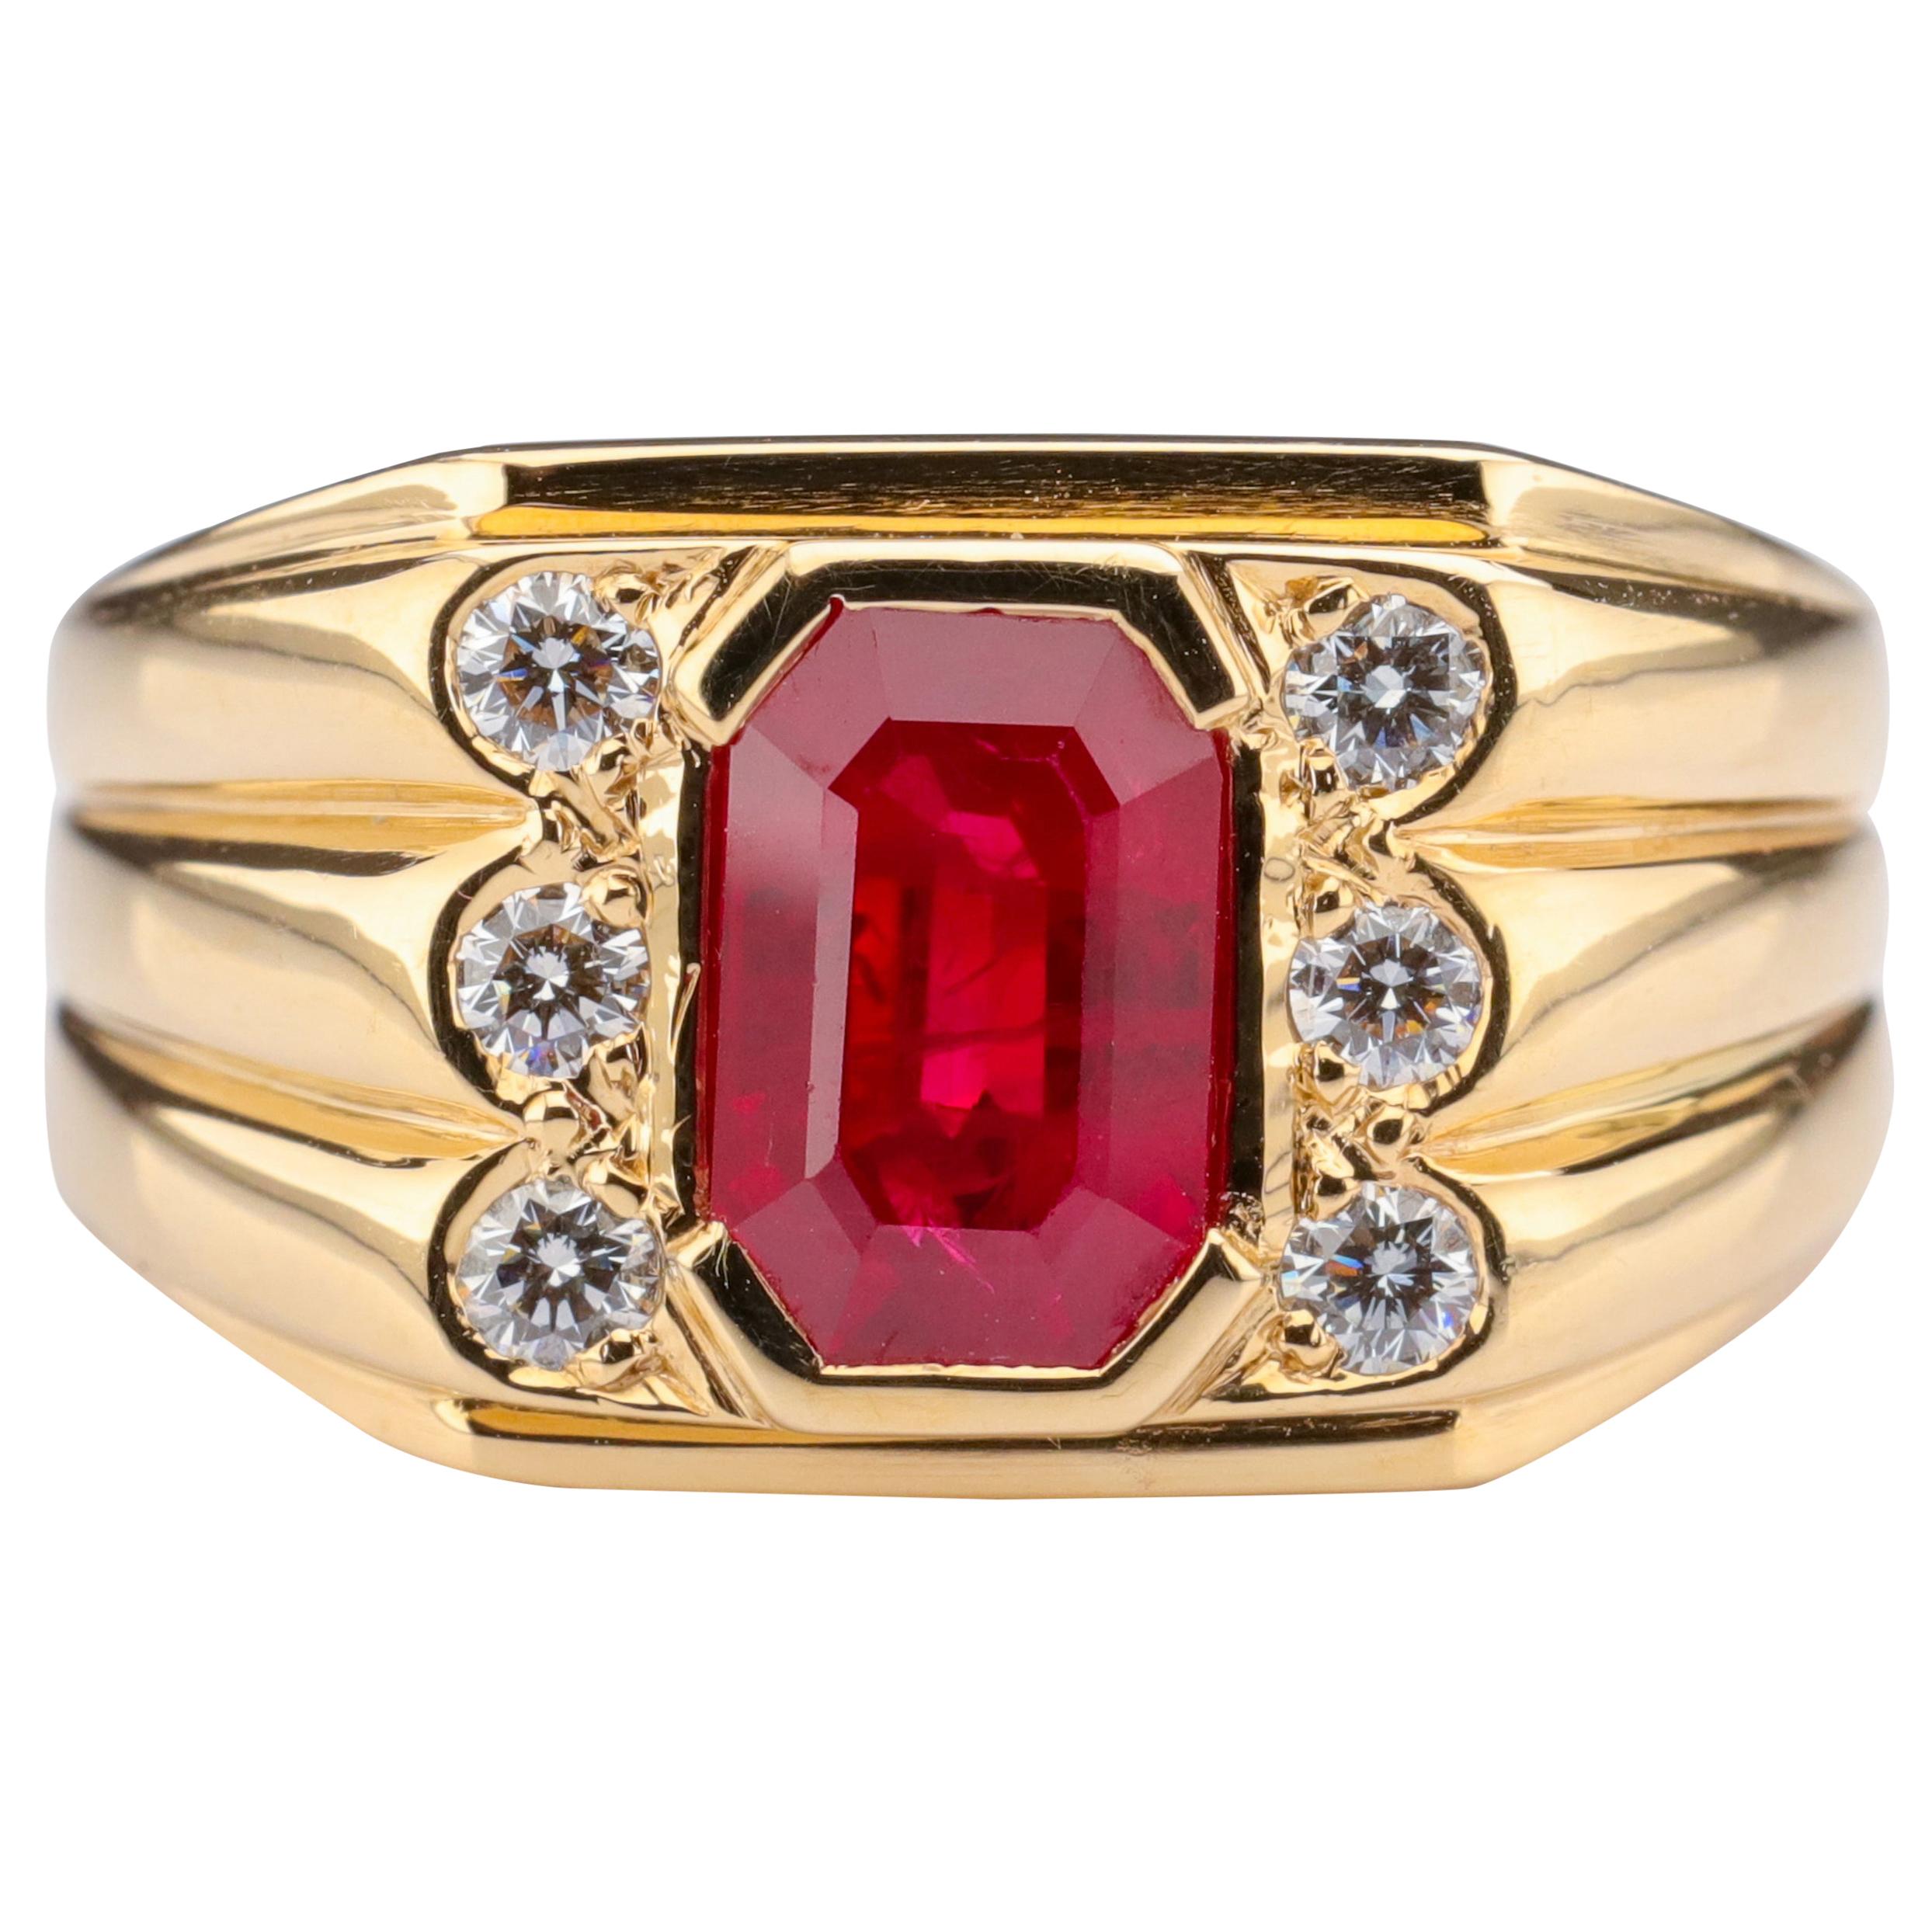 Men's Ruby and Diamond Ring GIA Certified as "Pigeon Blood Red"